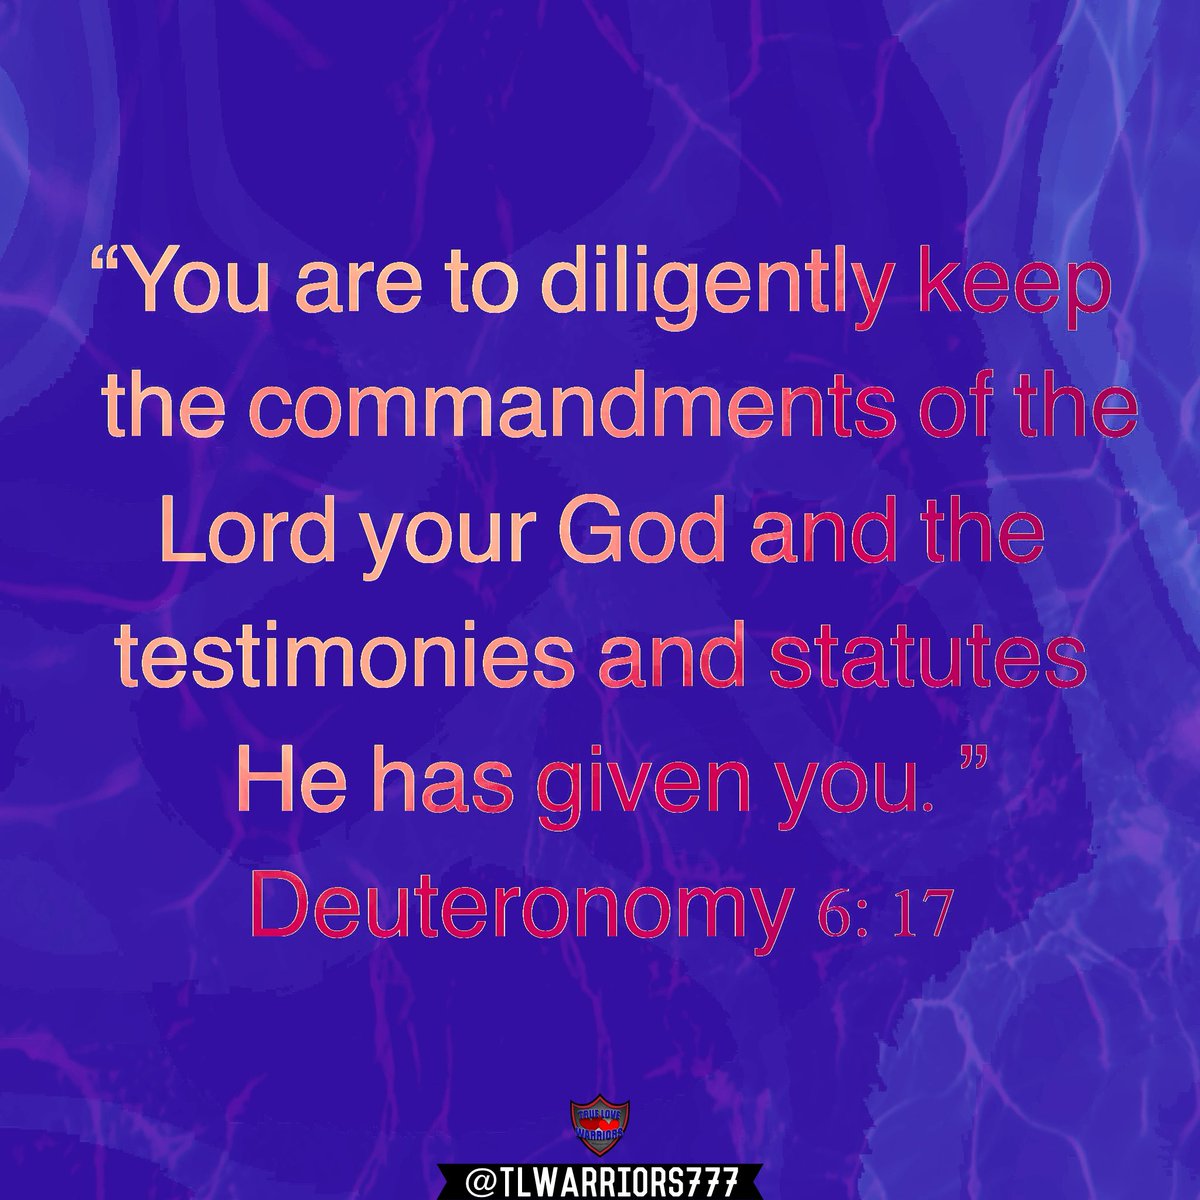 “You are to diligently keep the commandments of the Lord your God and the testimonies and statutes He has given you.” Deuteronomy 6:17